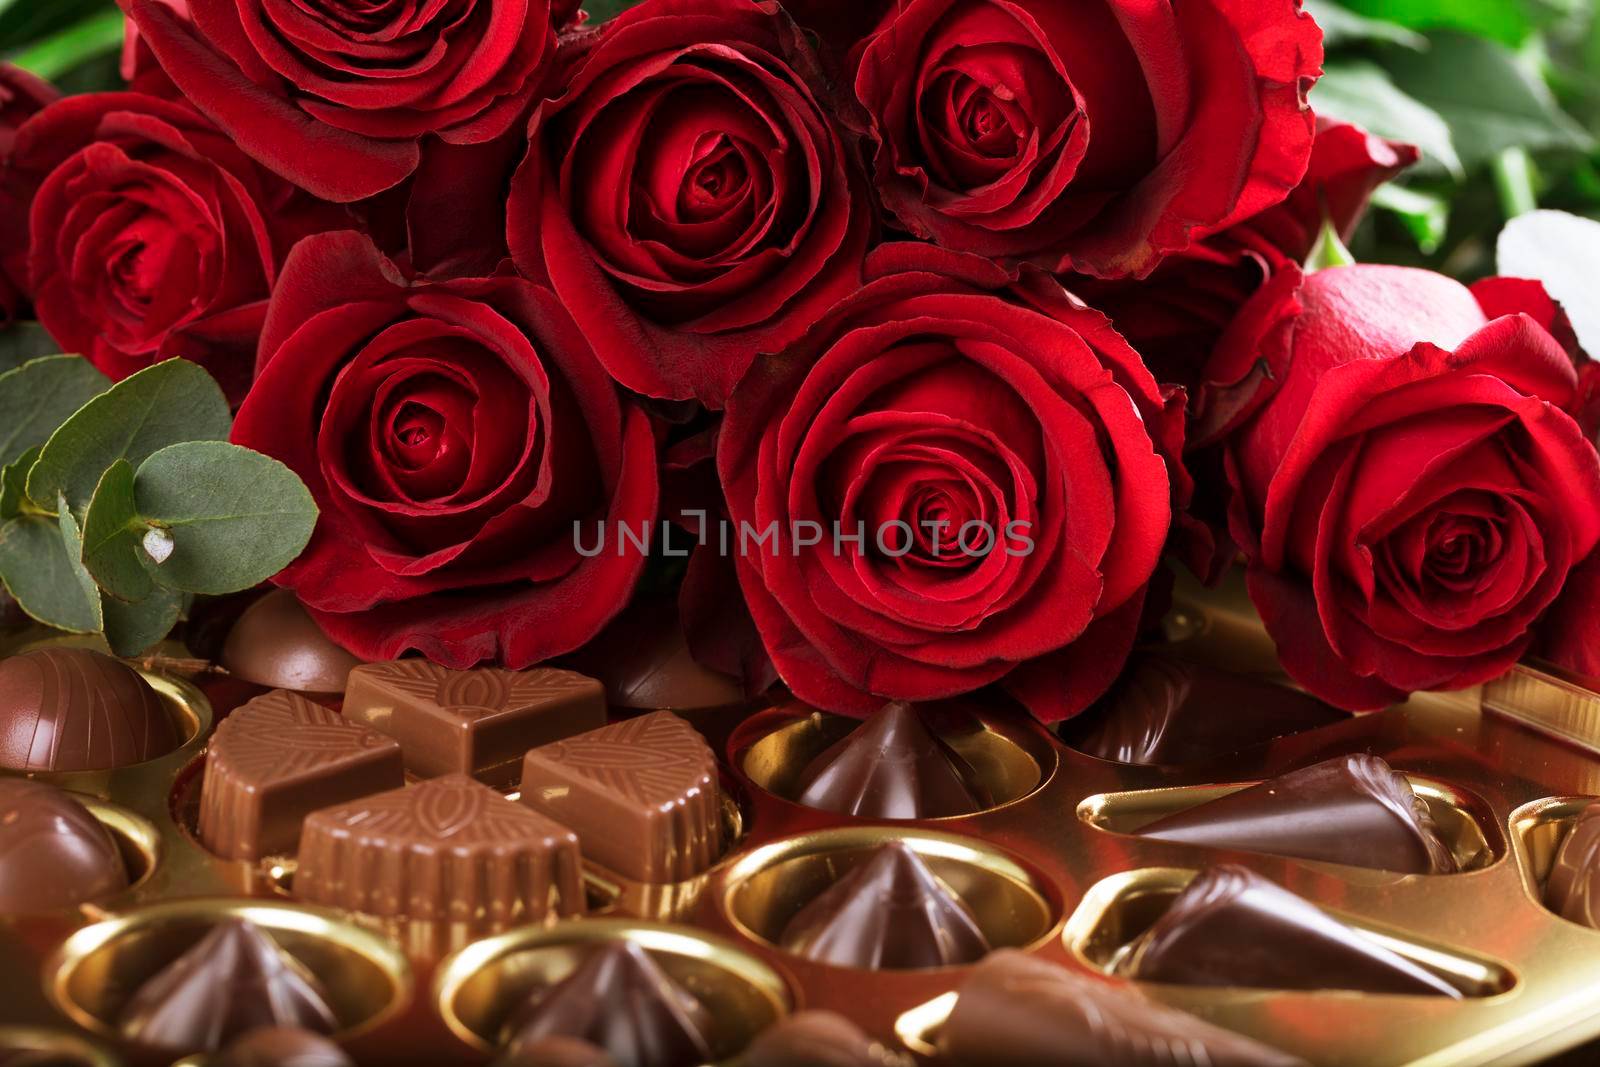 Vibrant red roses on a box of chocolates for valentine's day, or any day to say I love you.